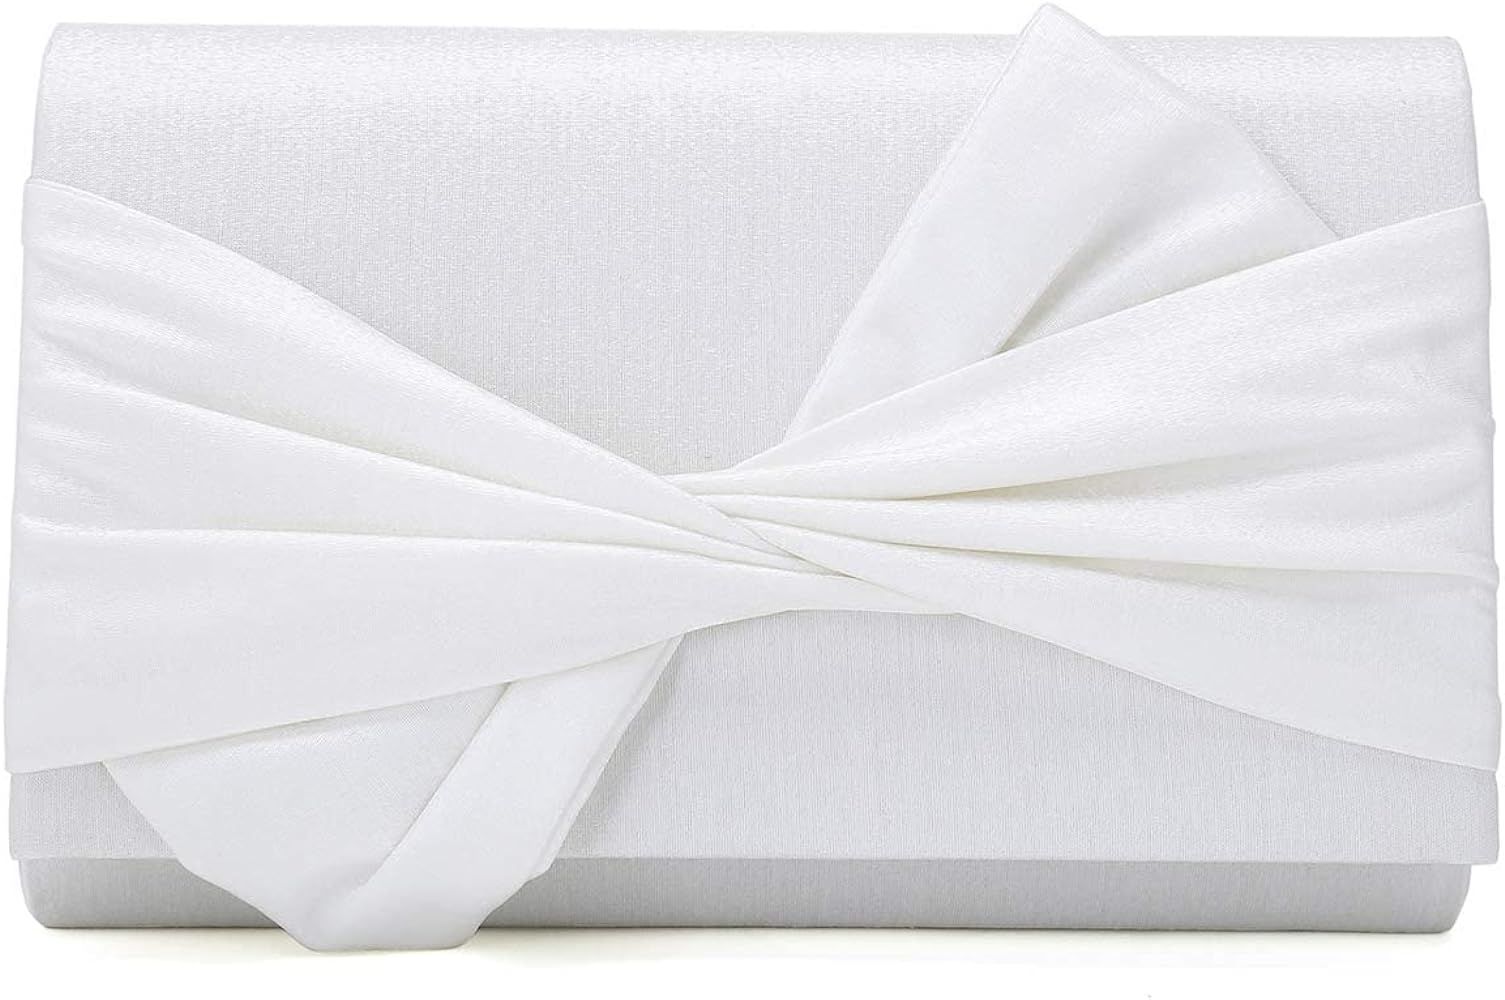 IXEBELLA Satin Evening Bag Bow Flap Clutch Purse for Women Formal Party/Prom/Wedding… | Amazon (US)